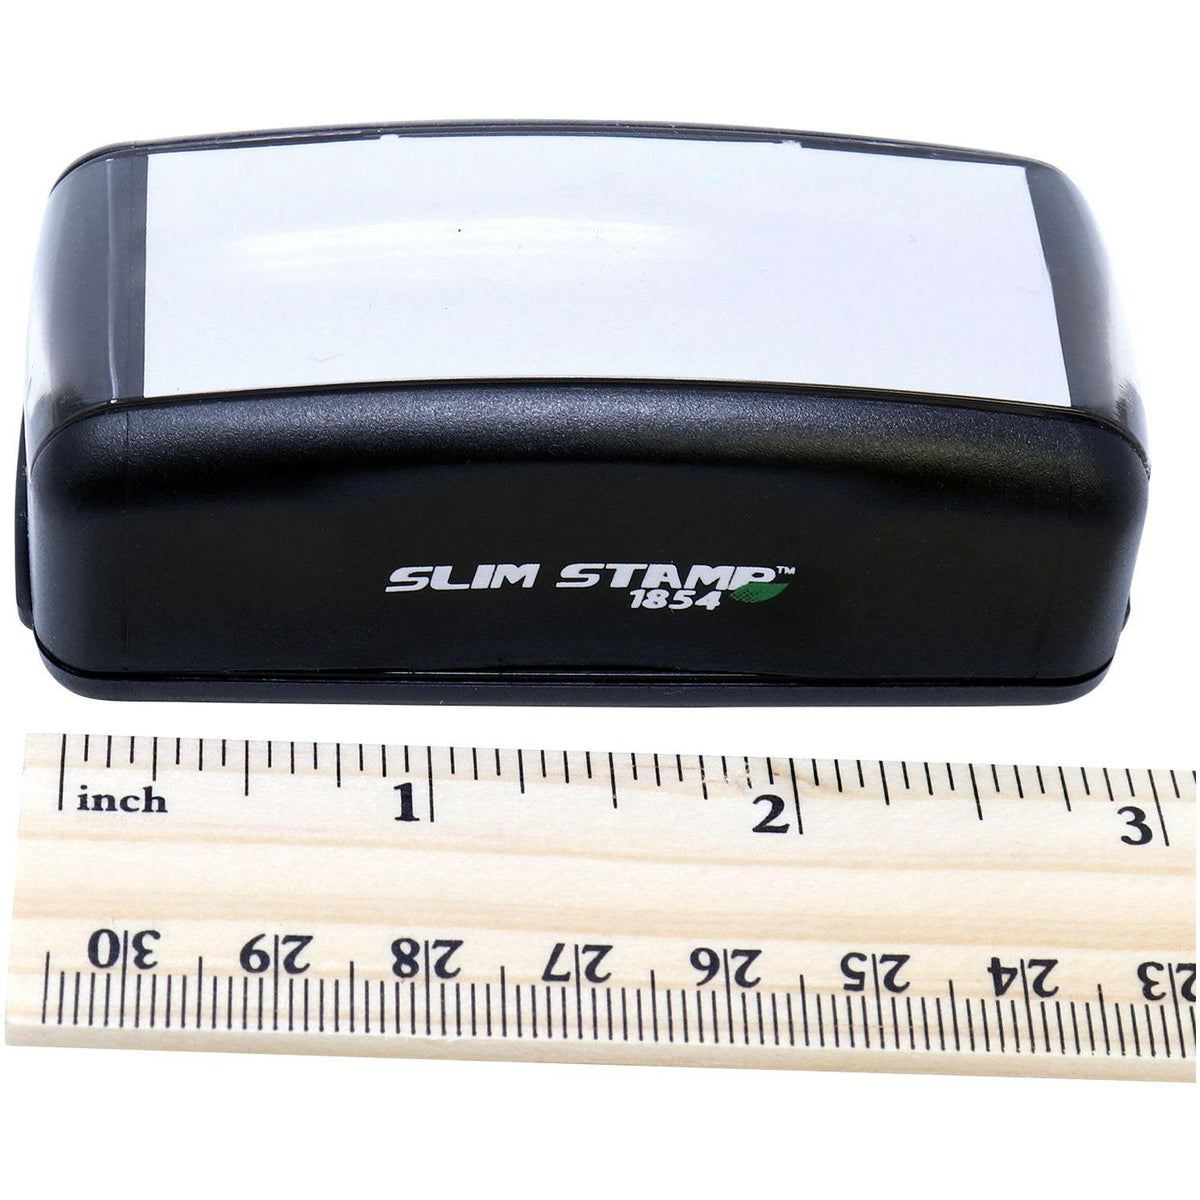 Measurement Large Pre-Inked Vacant Stamp with Ruler